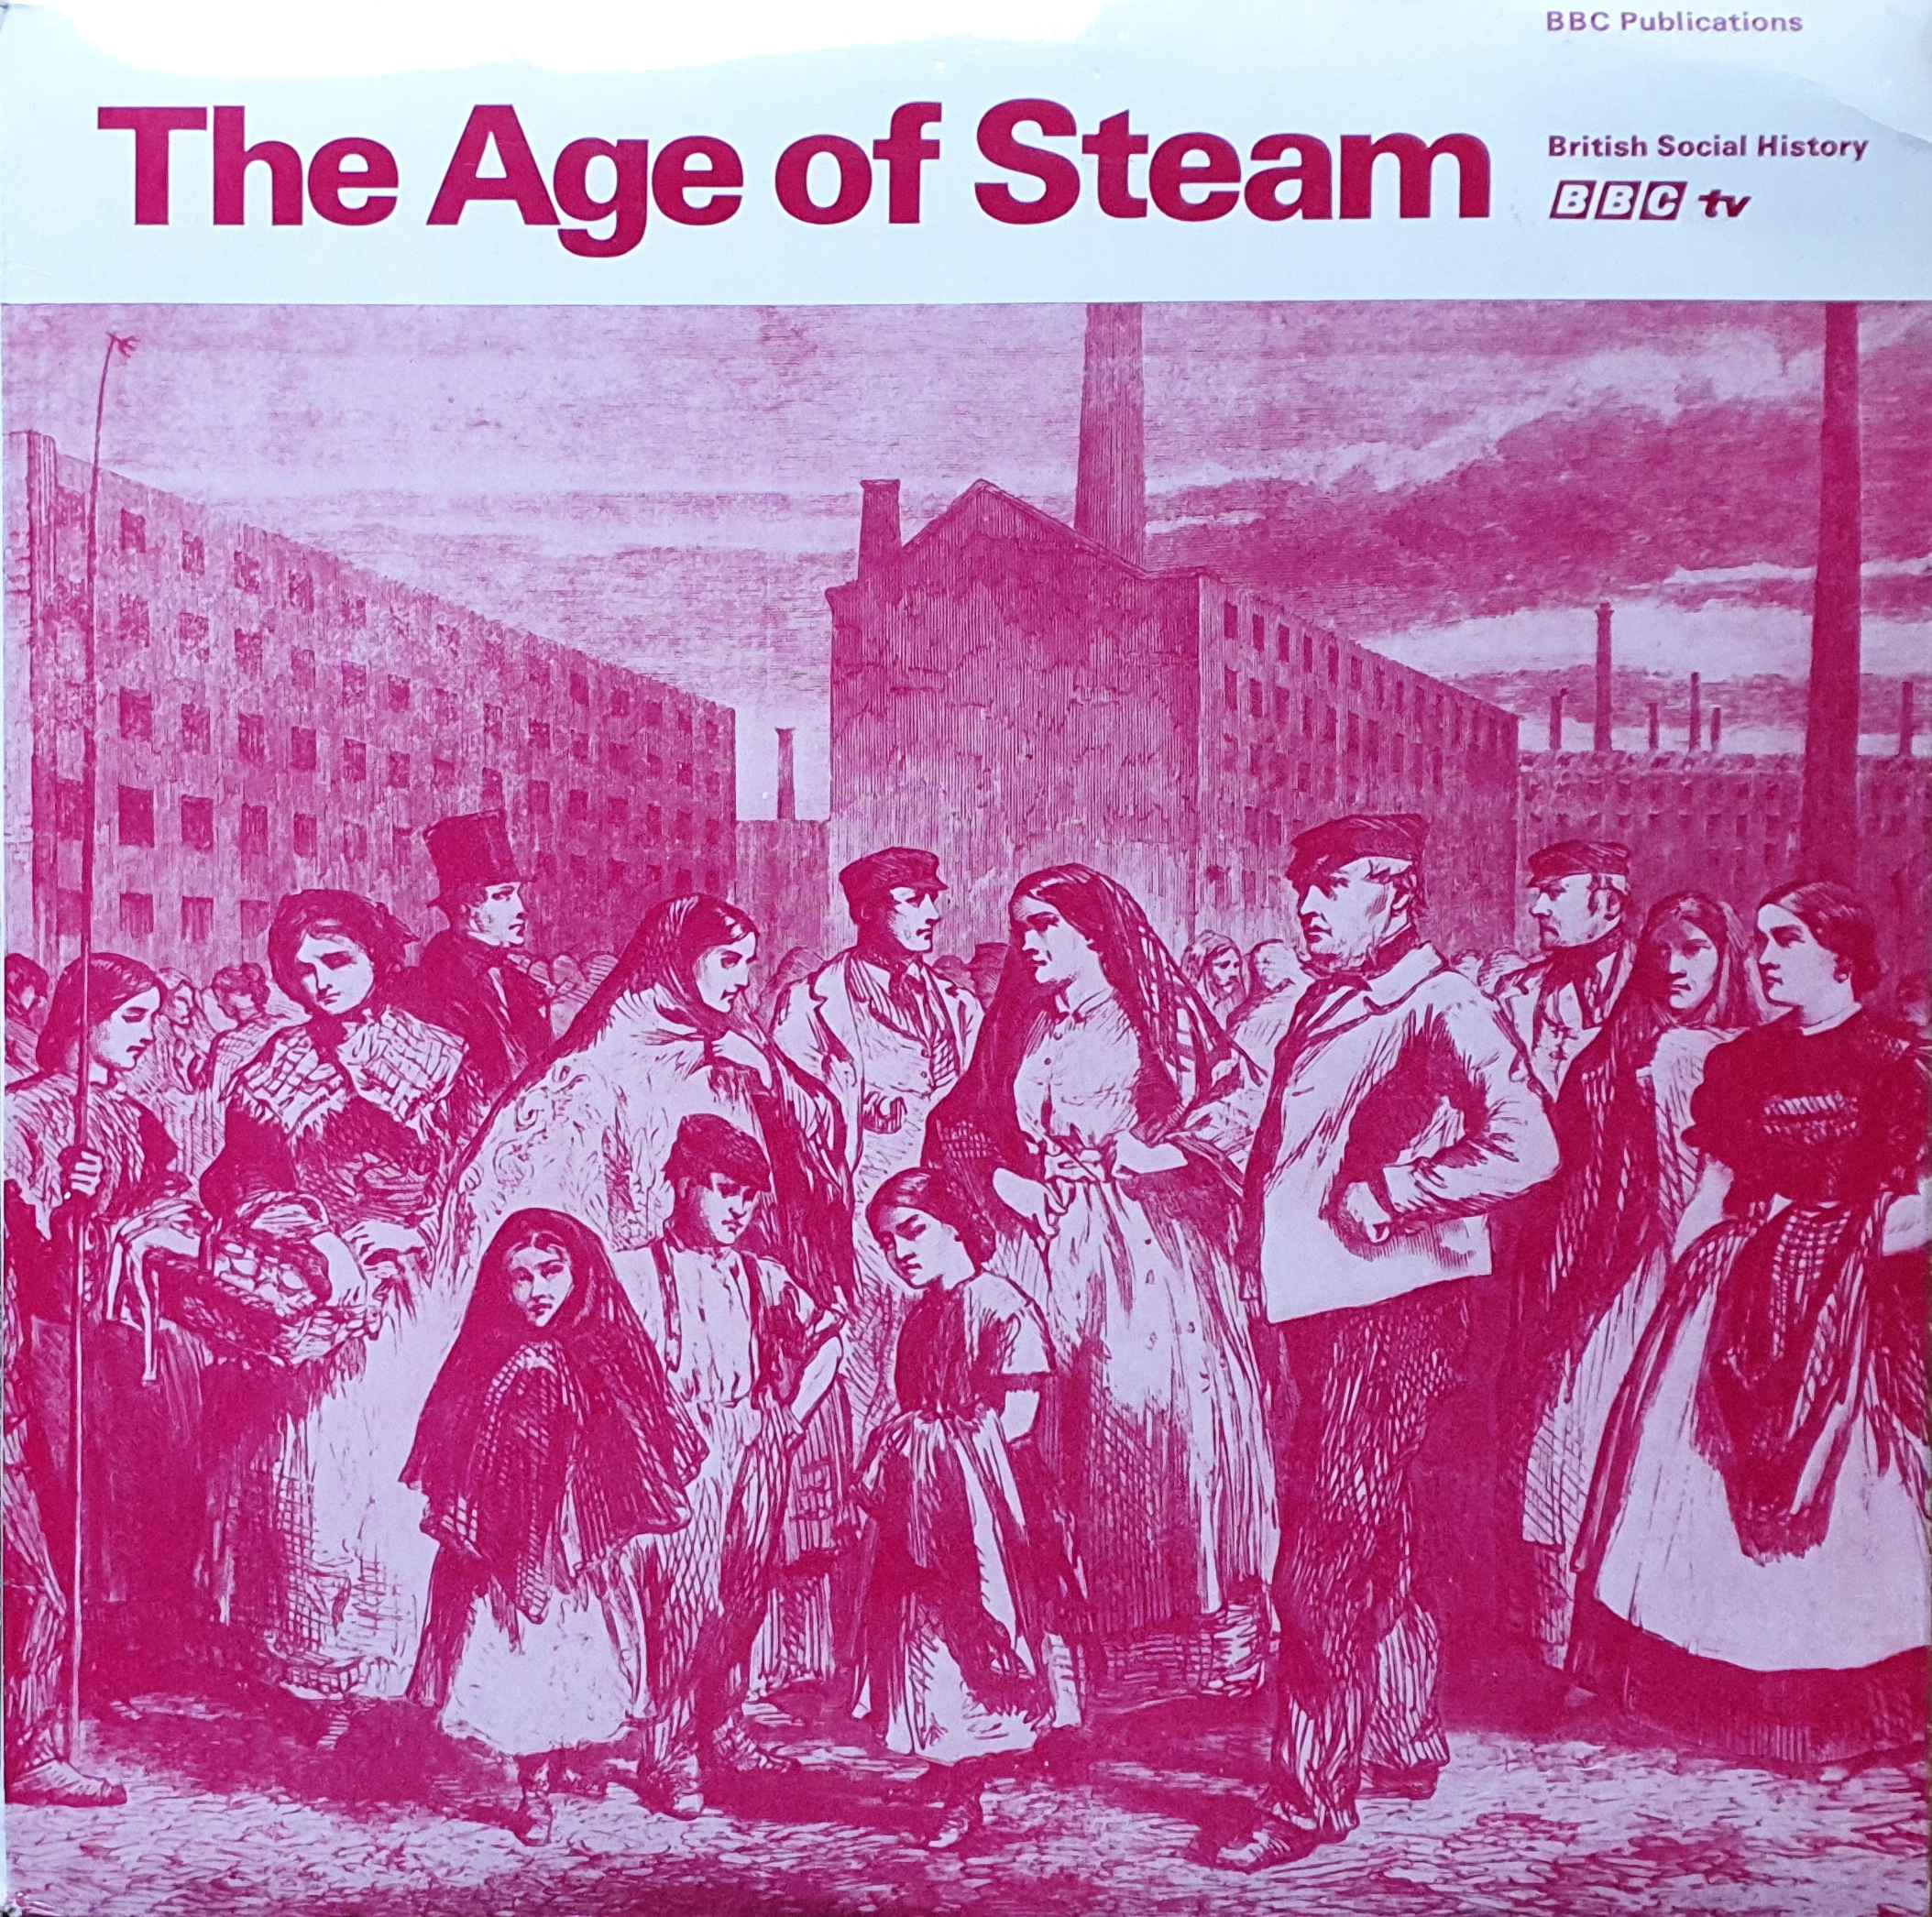 Picture of OP 159/160 The age of steam by artist Alex Glasgow / Various from the BBC albums - Records and Tapes library